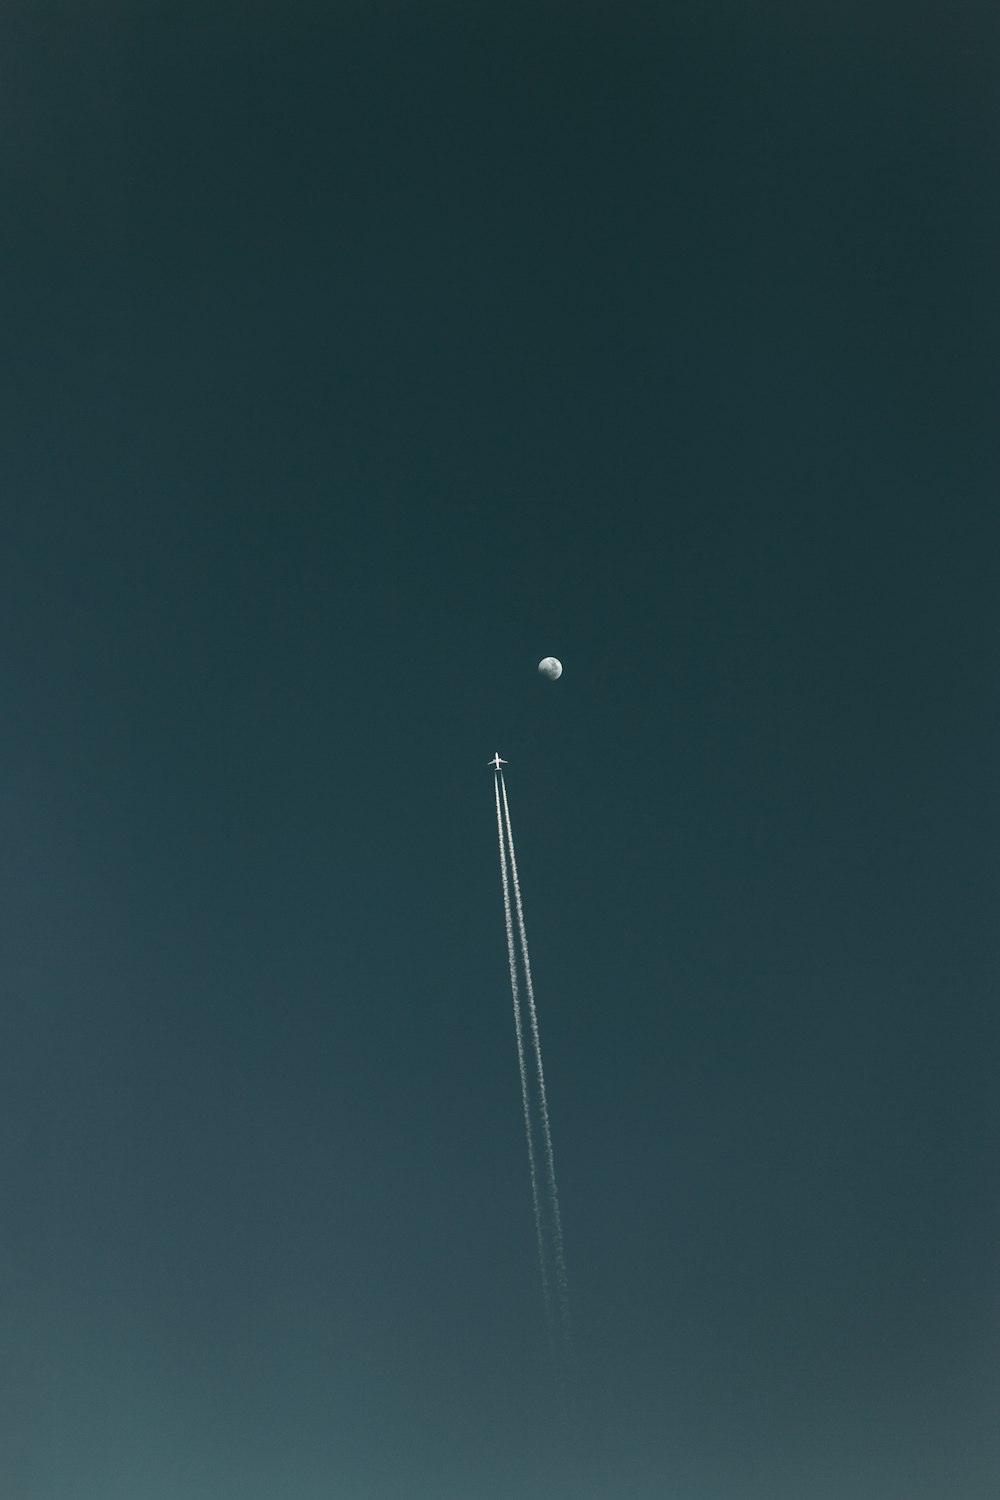 flying plane with contrail during nighttime